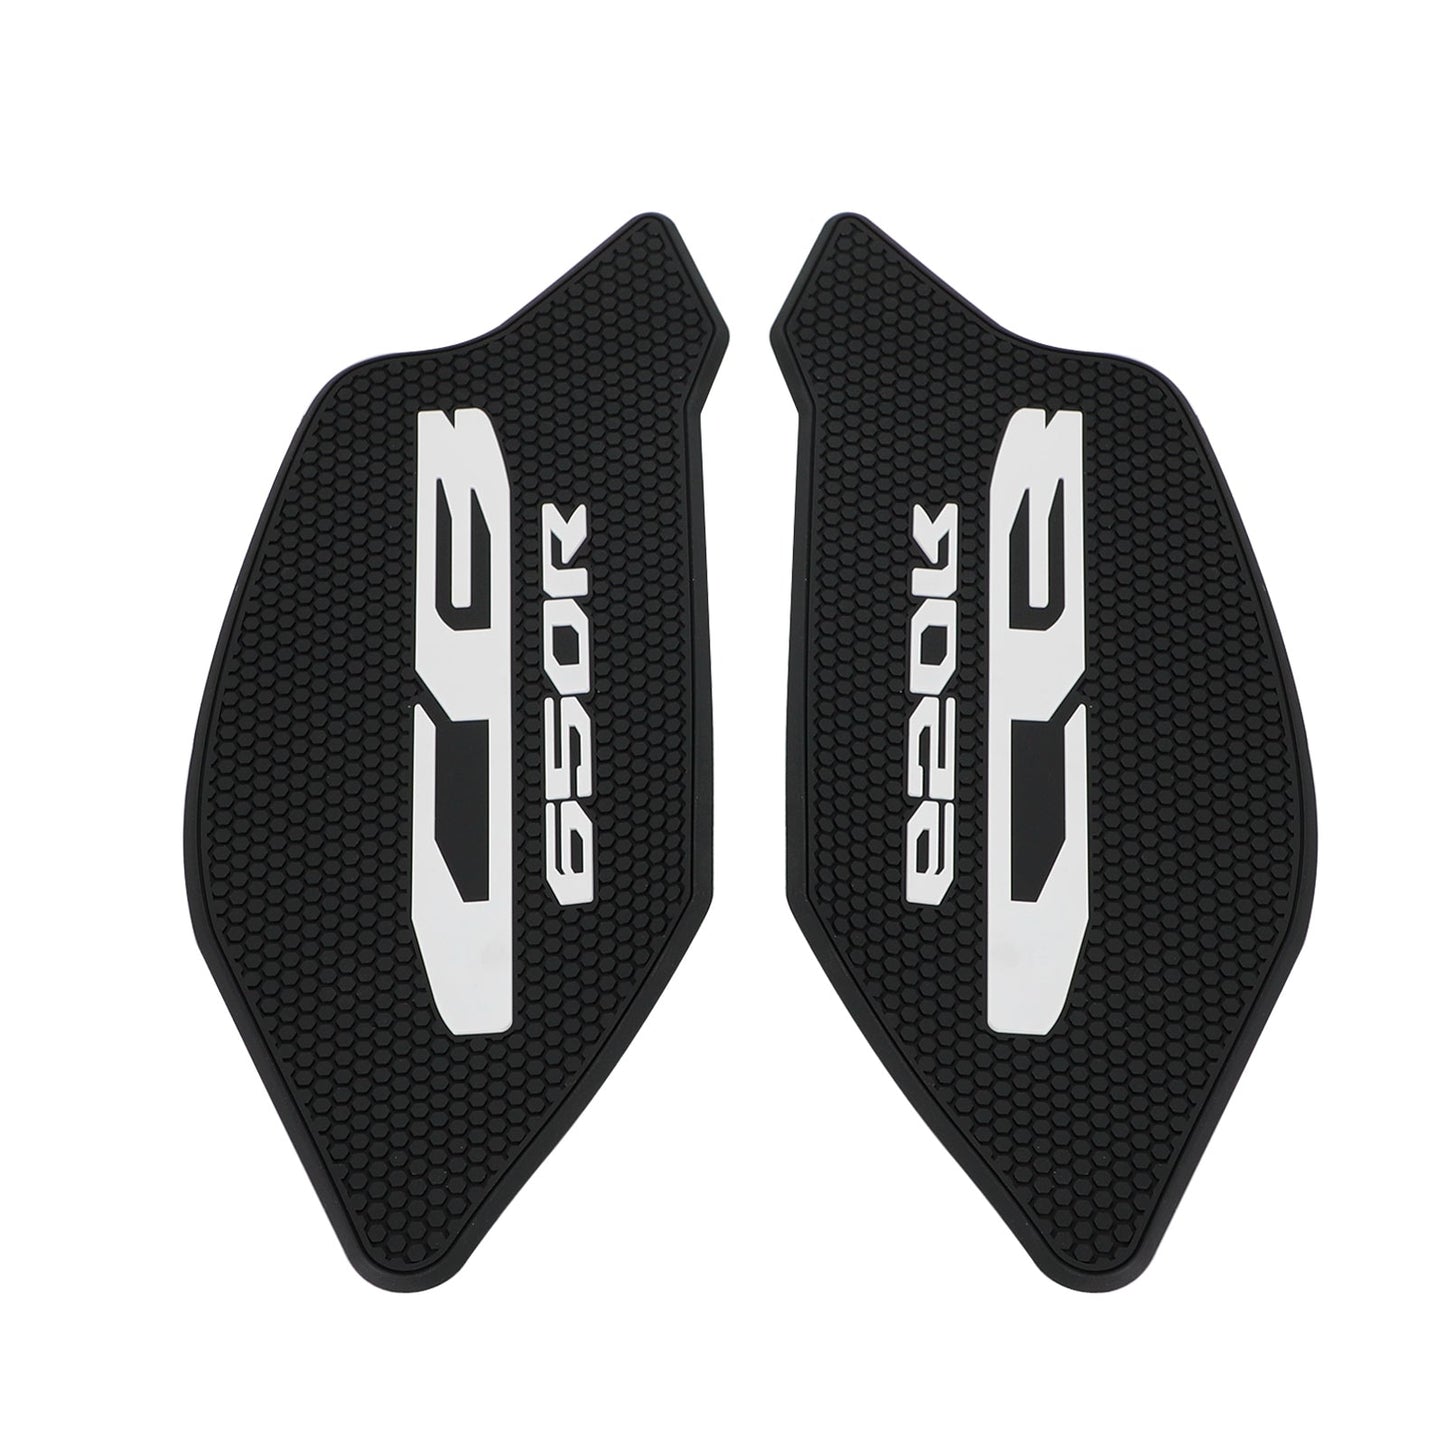 Honda CB 650 R 2019-2022 Fuel Tank Side Knee Grips Traction Pads